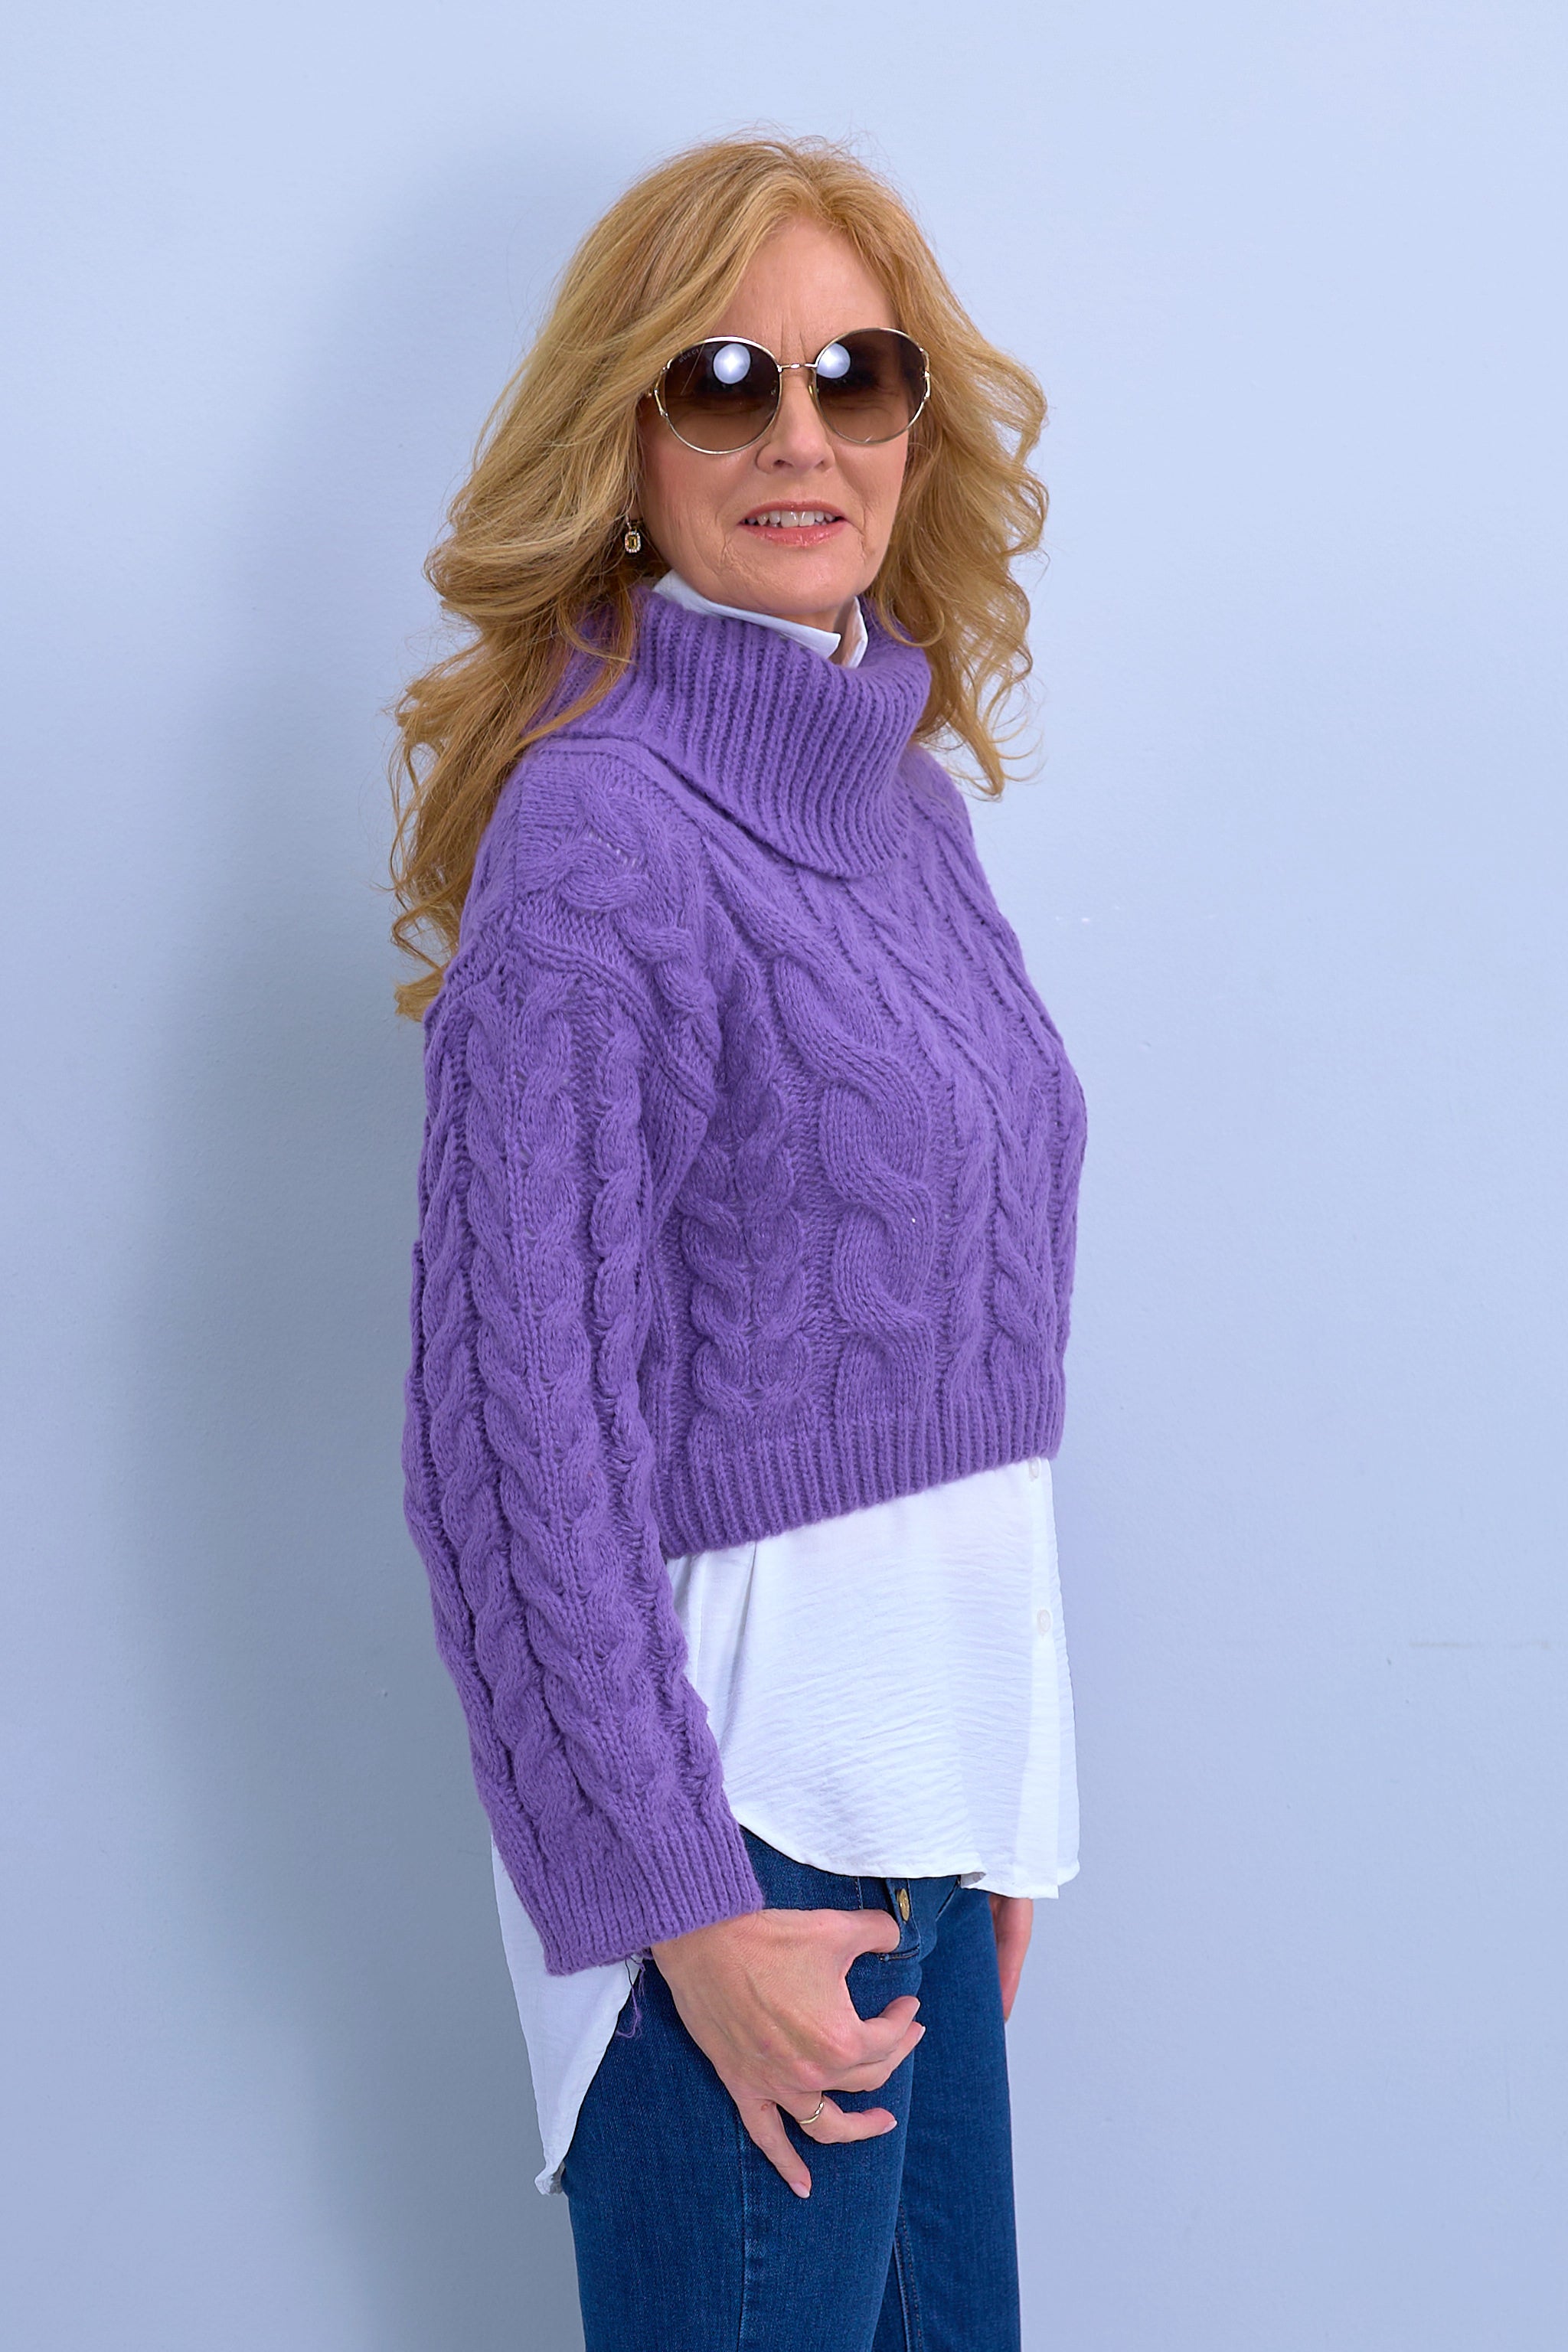 Crop top sweater with cable knit, purple